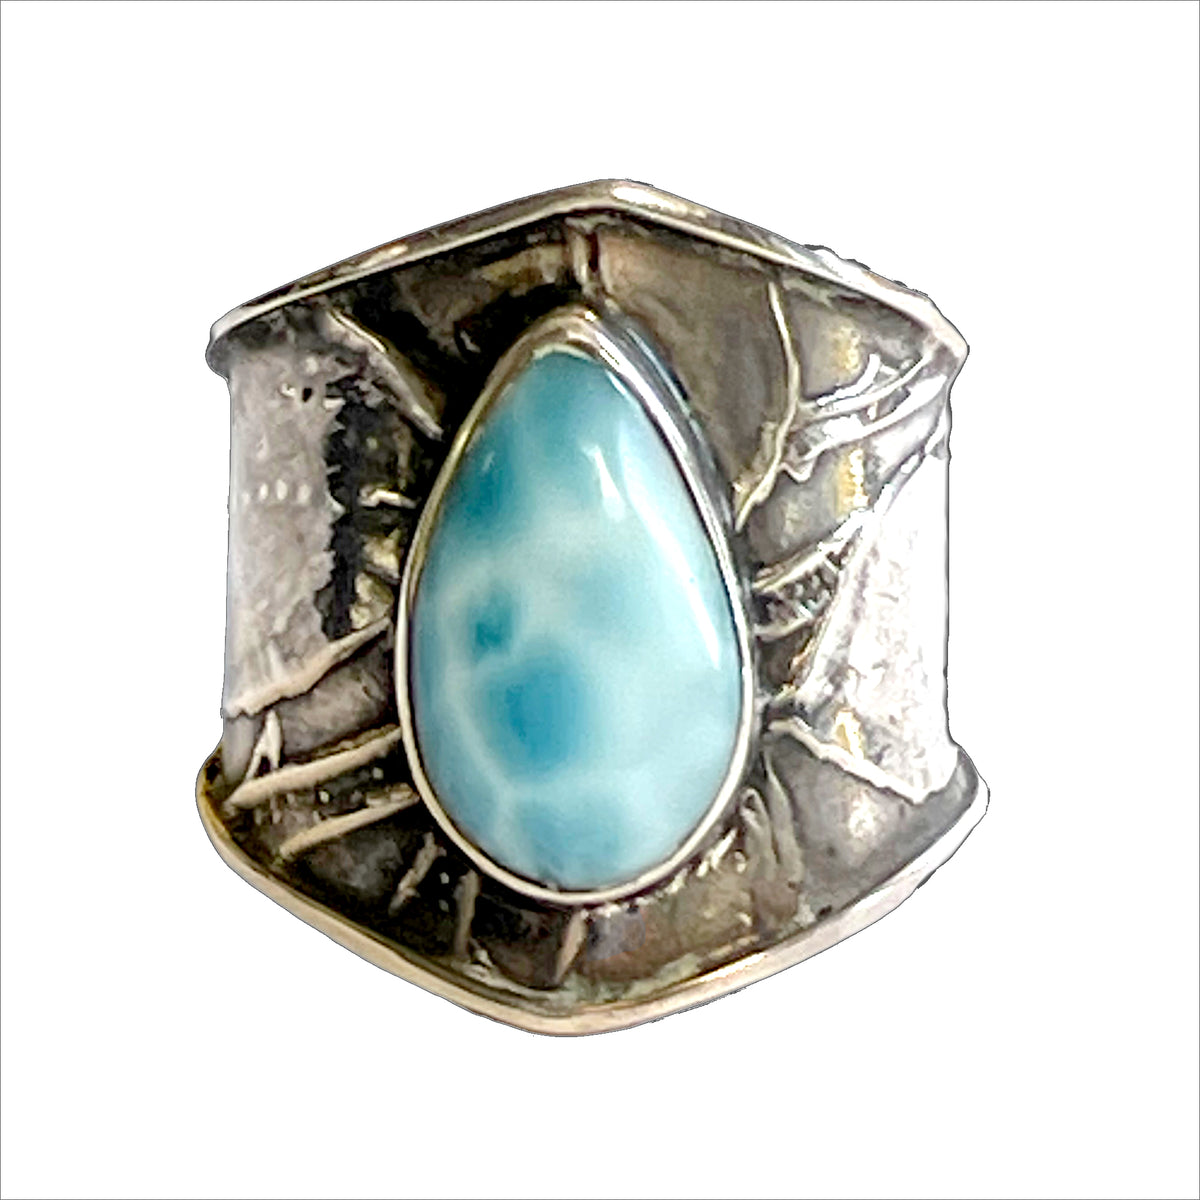 Tabra Jewelry 925 Sterling Silver Embossed Larimar Pear Ring Size 8.5 - 00K525